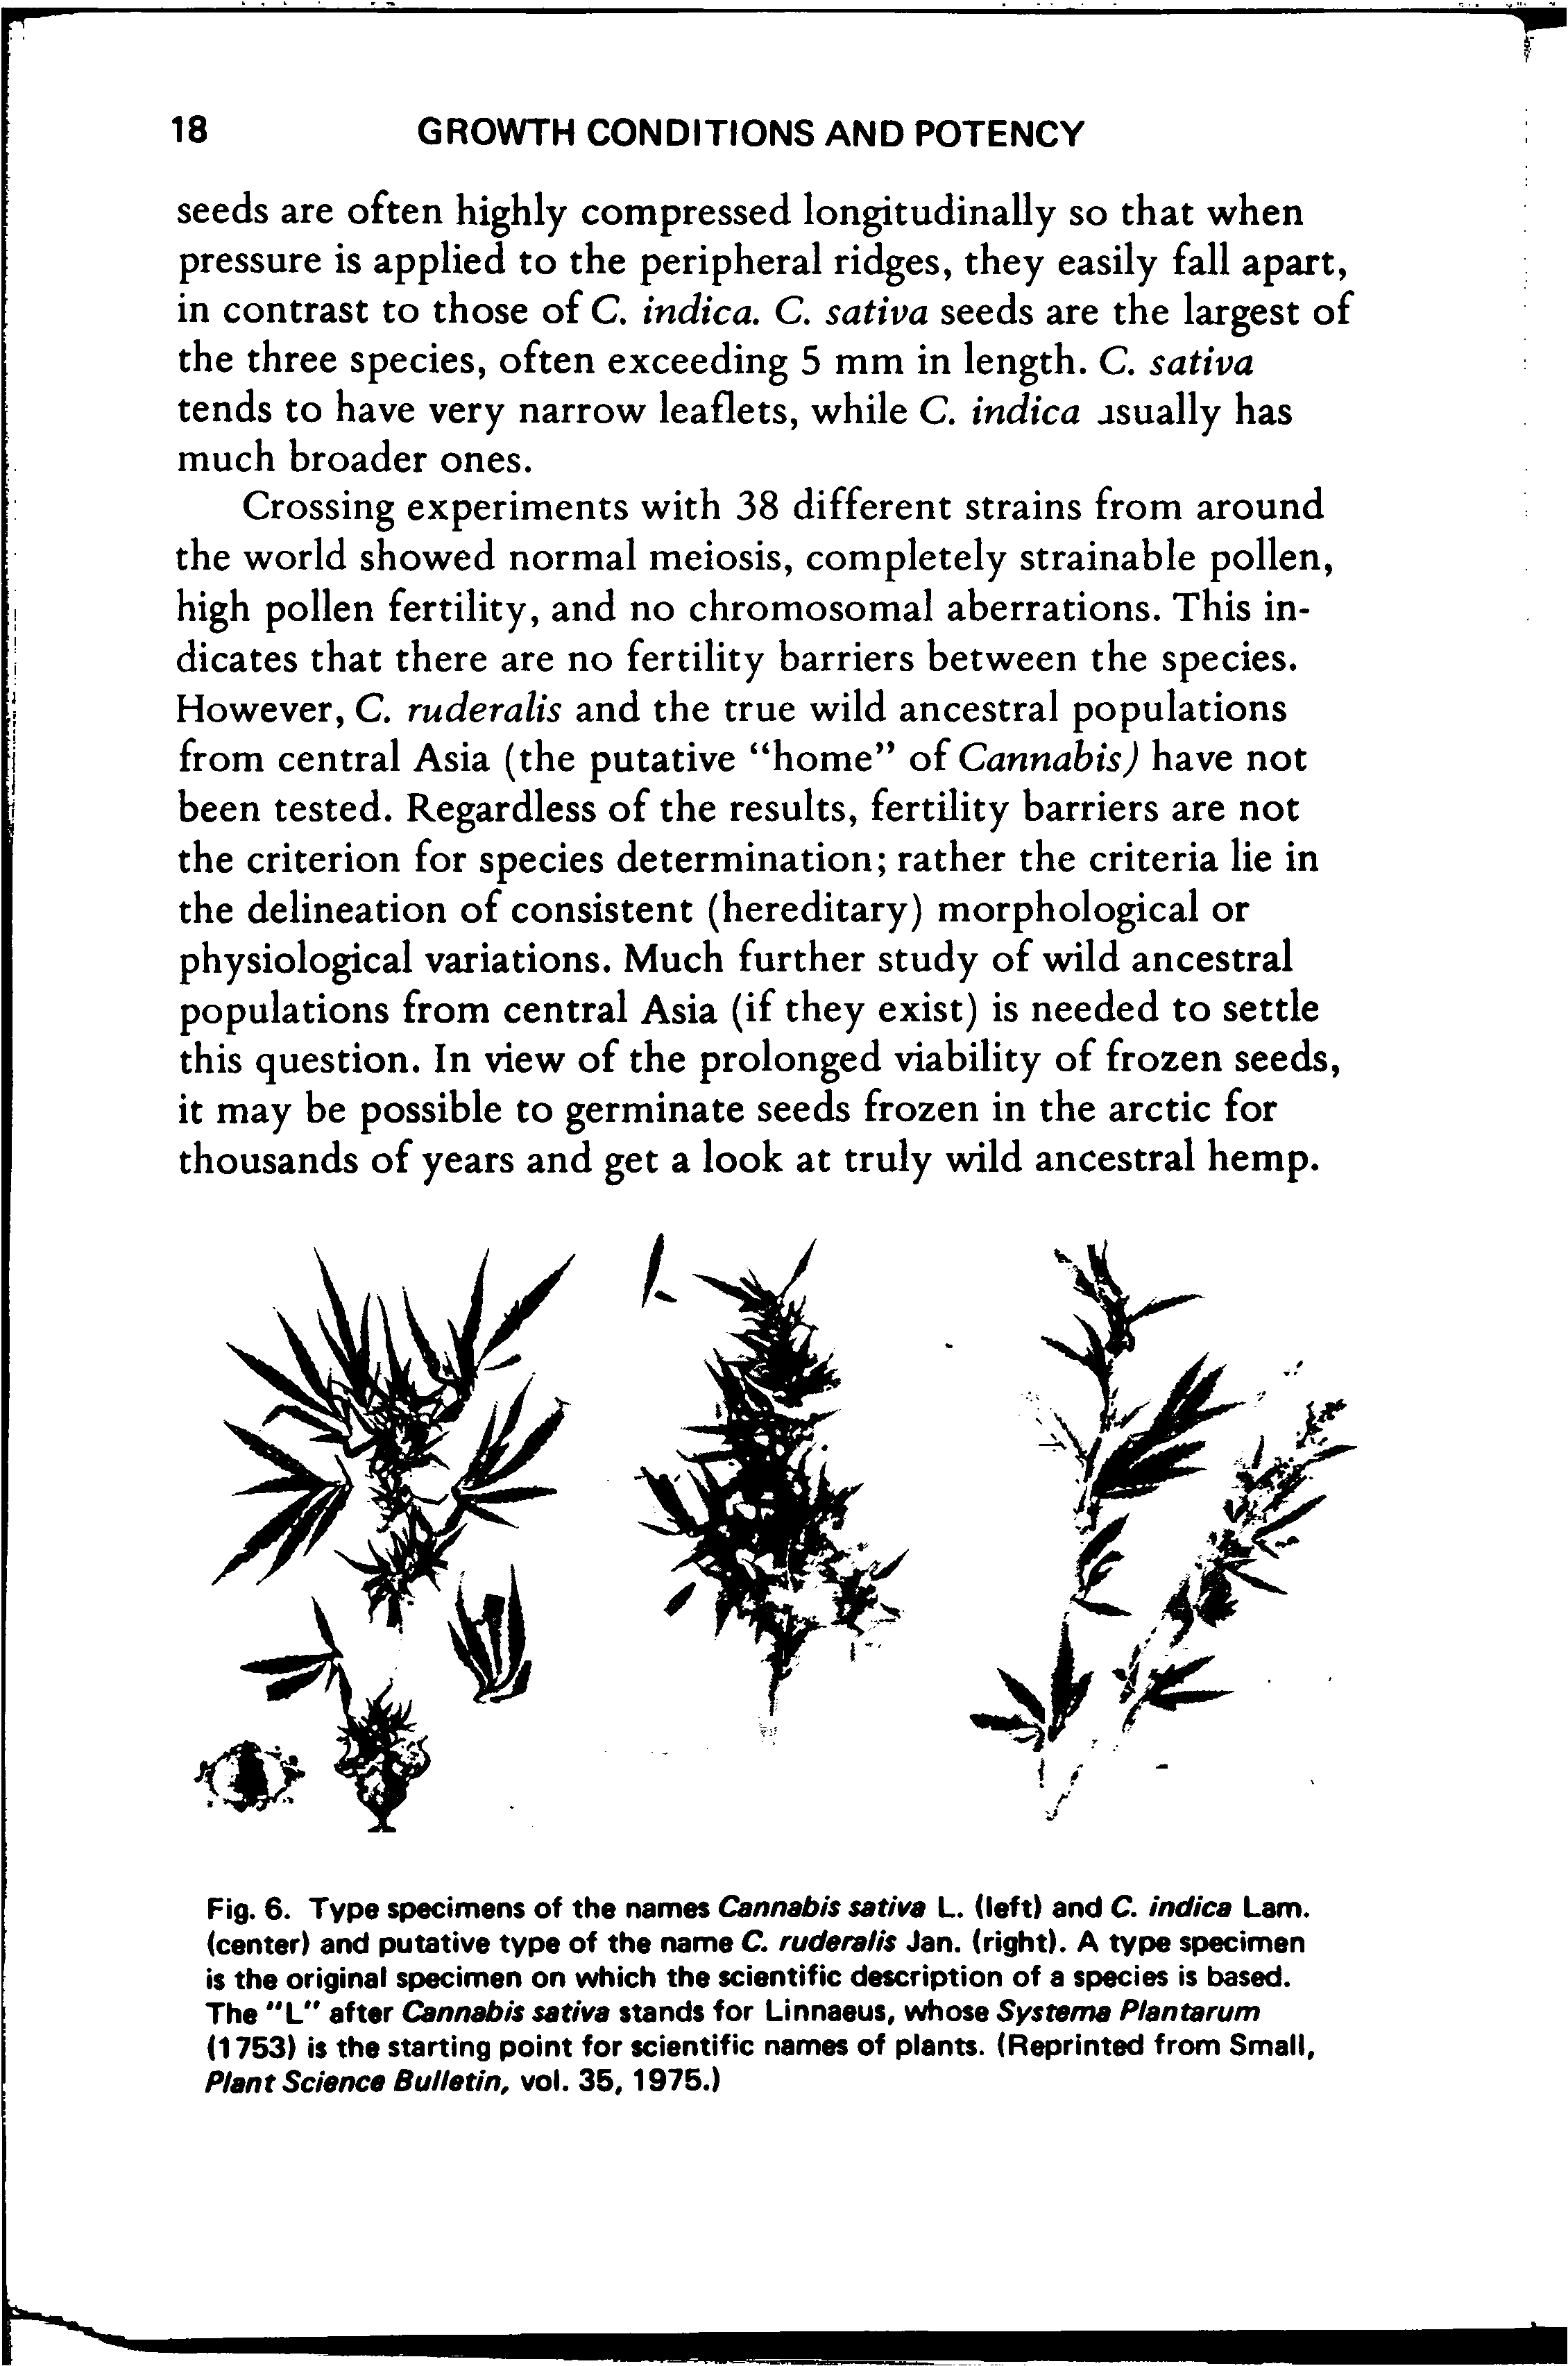 Fig. 6. Type specimens of the names Cannabis sativa L. (left) and C. indica Lam. (center) and putative type of the name C. ruderalis Jan. (right). A type specimen is the original specimen on which the scientific description of a species is based. The "L" after Cannabis sativa stands for Linnaeus, whose Systema Plantarum (1753) is the starting point for scientific names of plants. (Reprinted from Small, Plant Science Bulletin, vol. 35,1975.)...